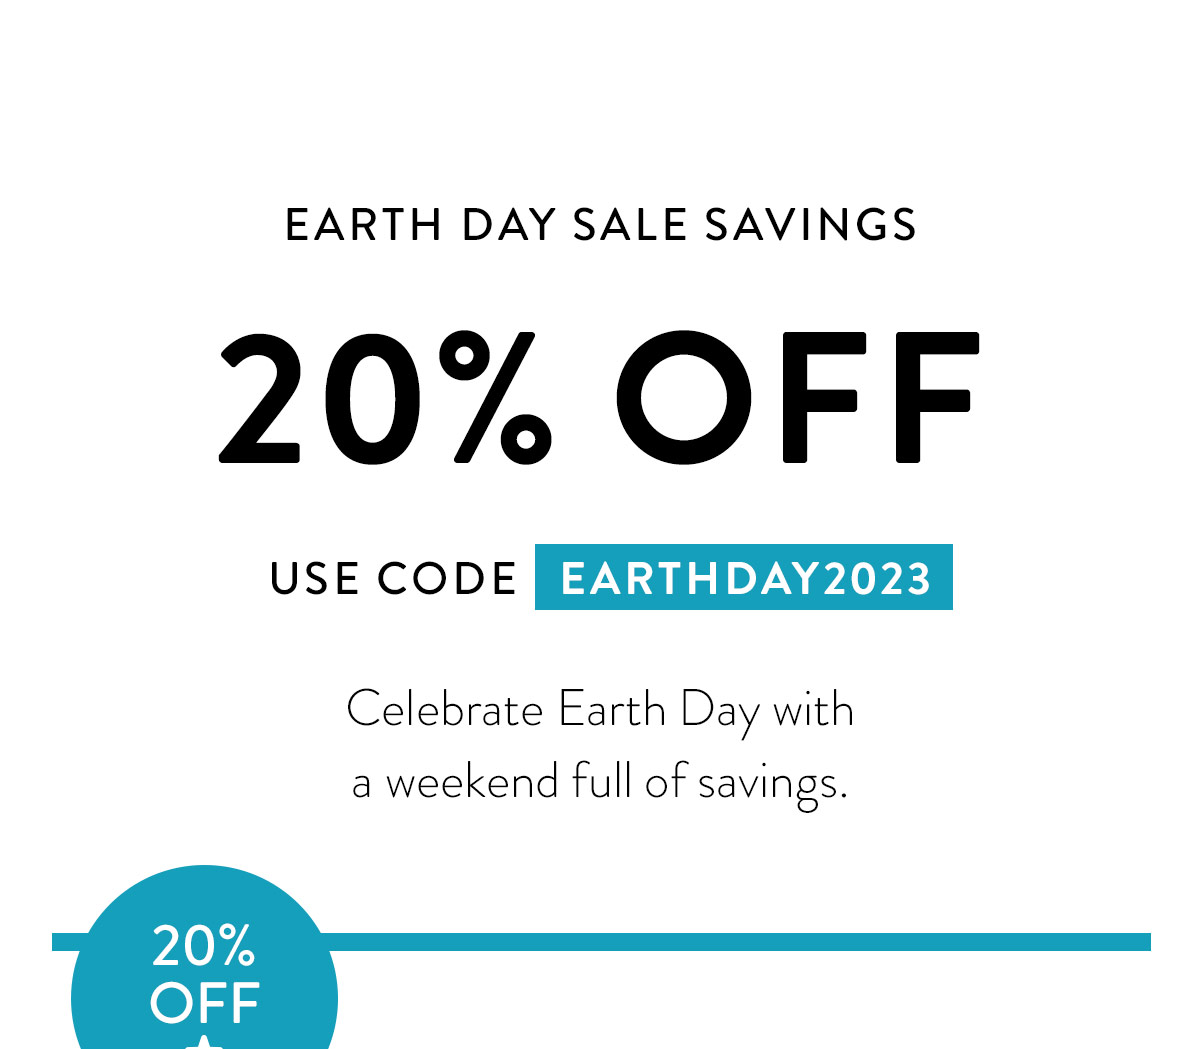 EARTH DAY SALE SAVINGS 20% OFF USE CODE EARTHDAY2023 Celebrate Earth Day and go a little green with a weekend full of savings. Badge: 20% OFF